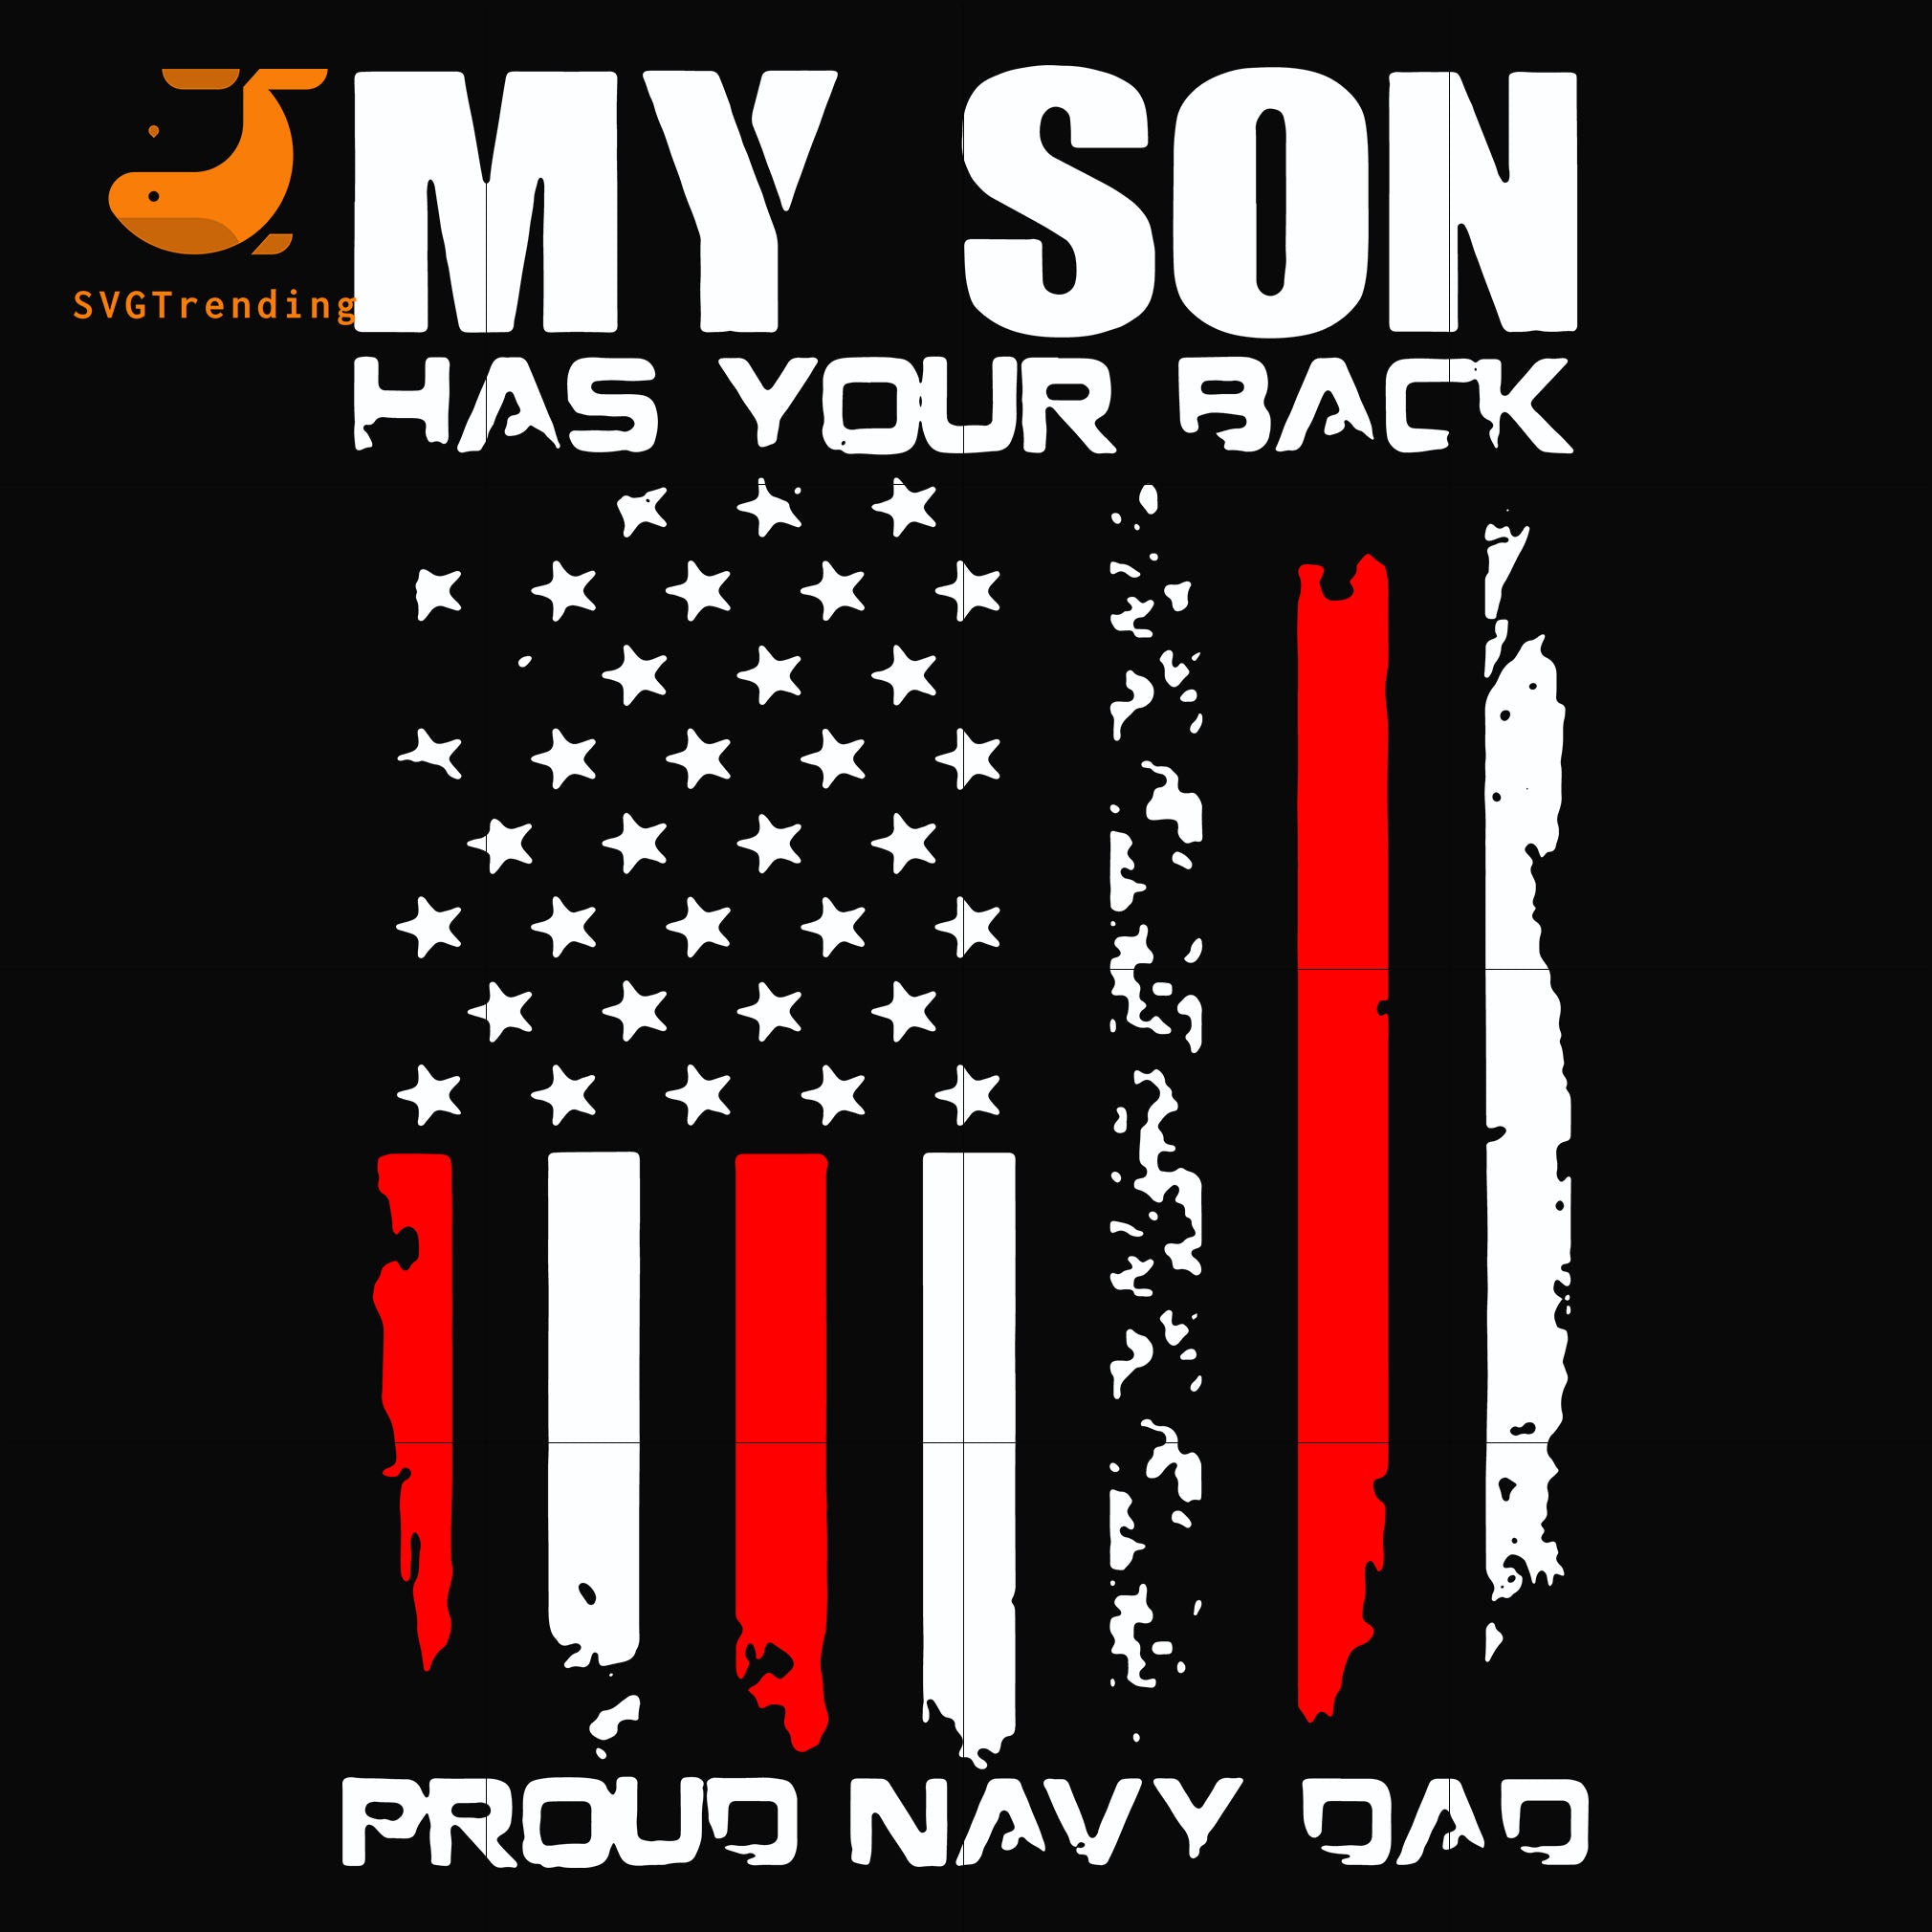 Download My Son Has Your Back Proud Navy Dad Svg Png Dxf Eps Digital File T Svgtrending